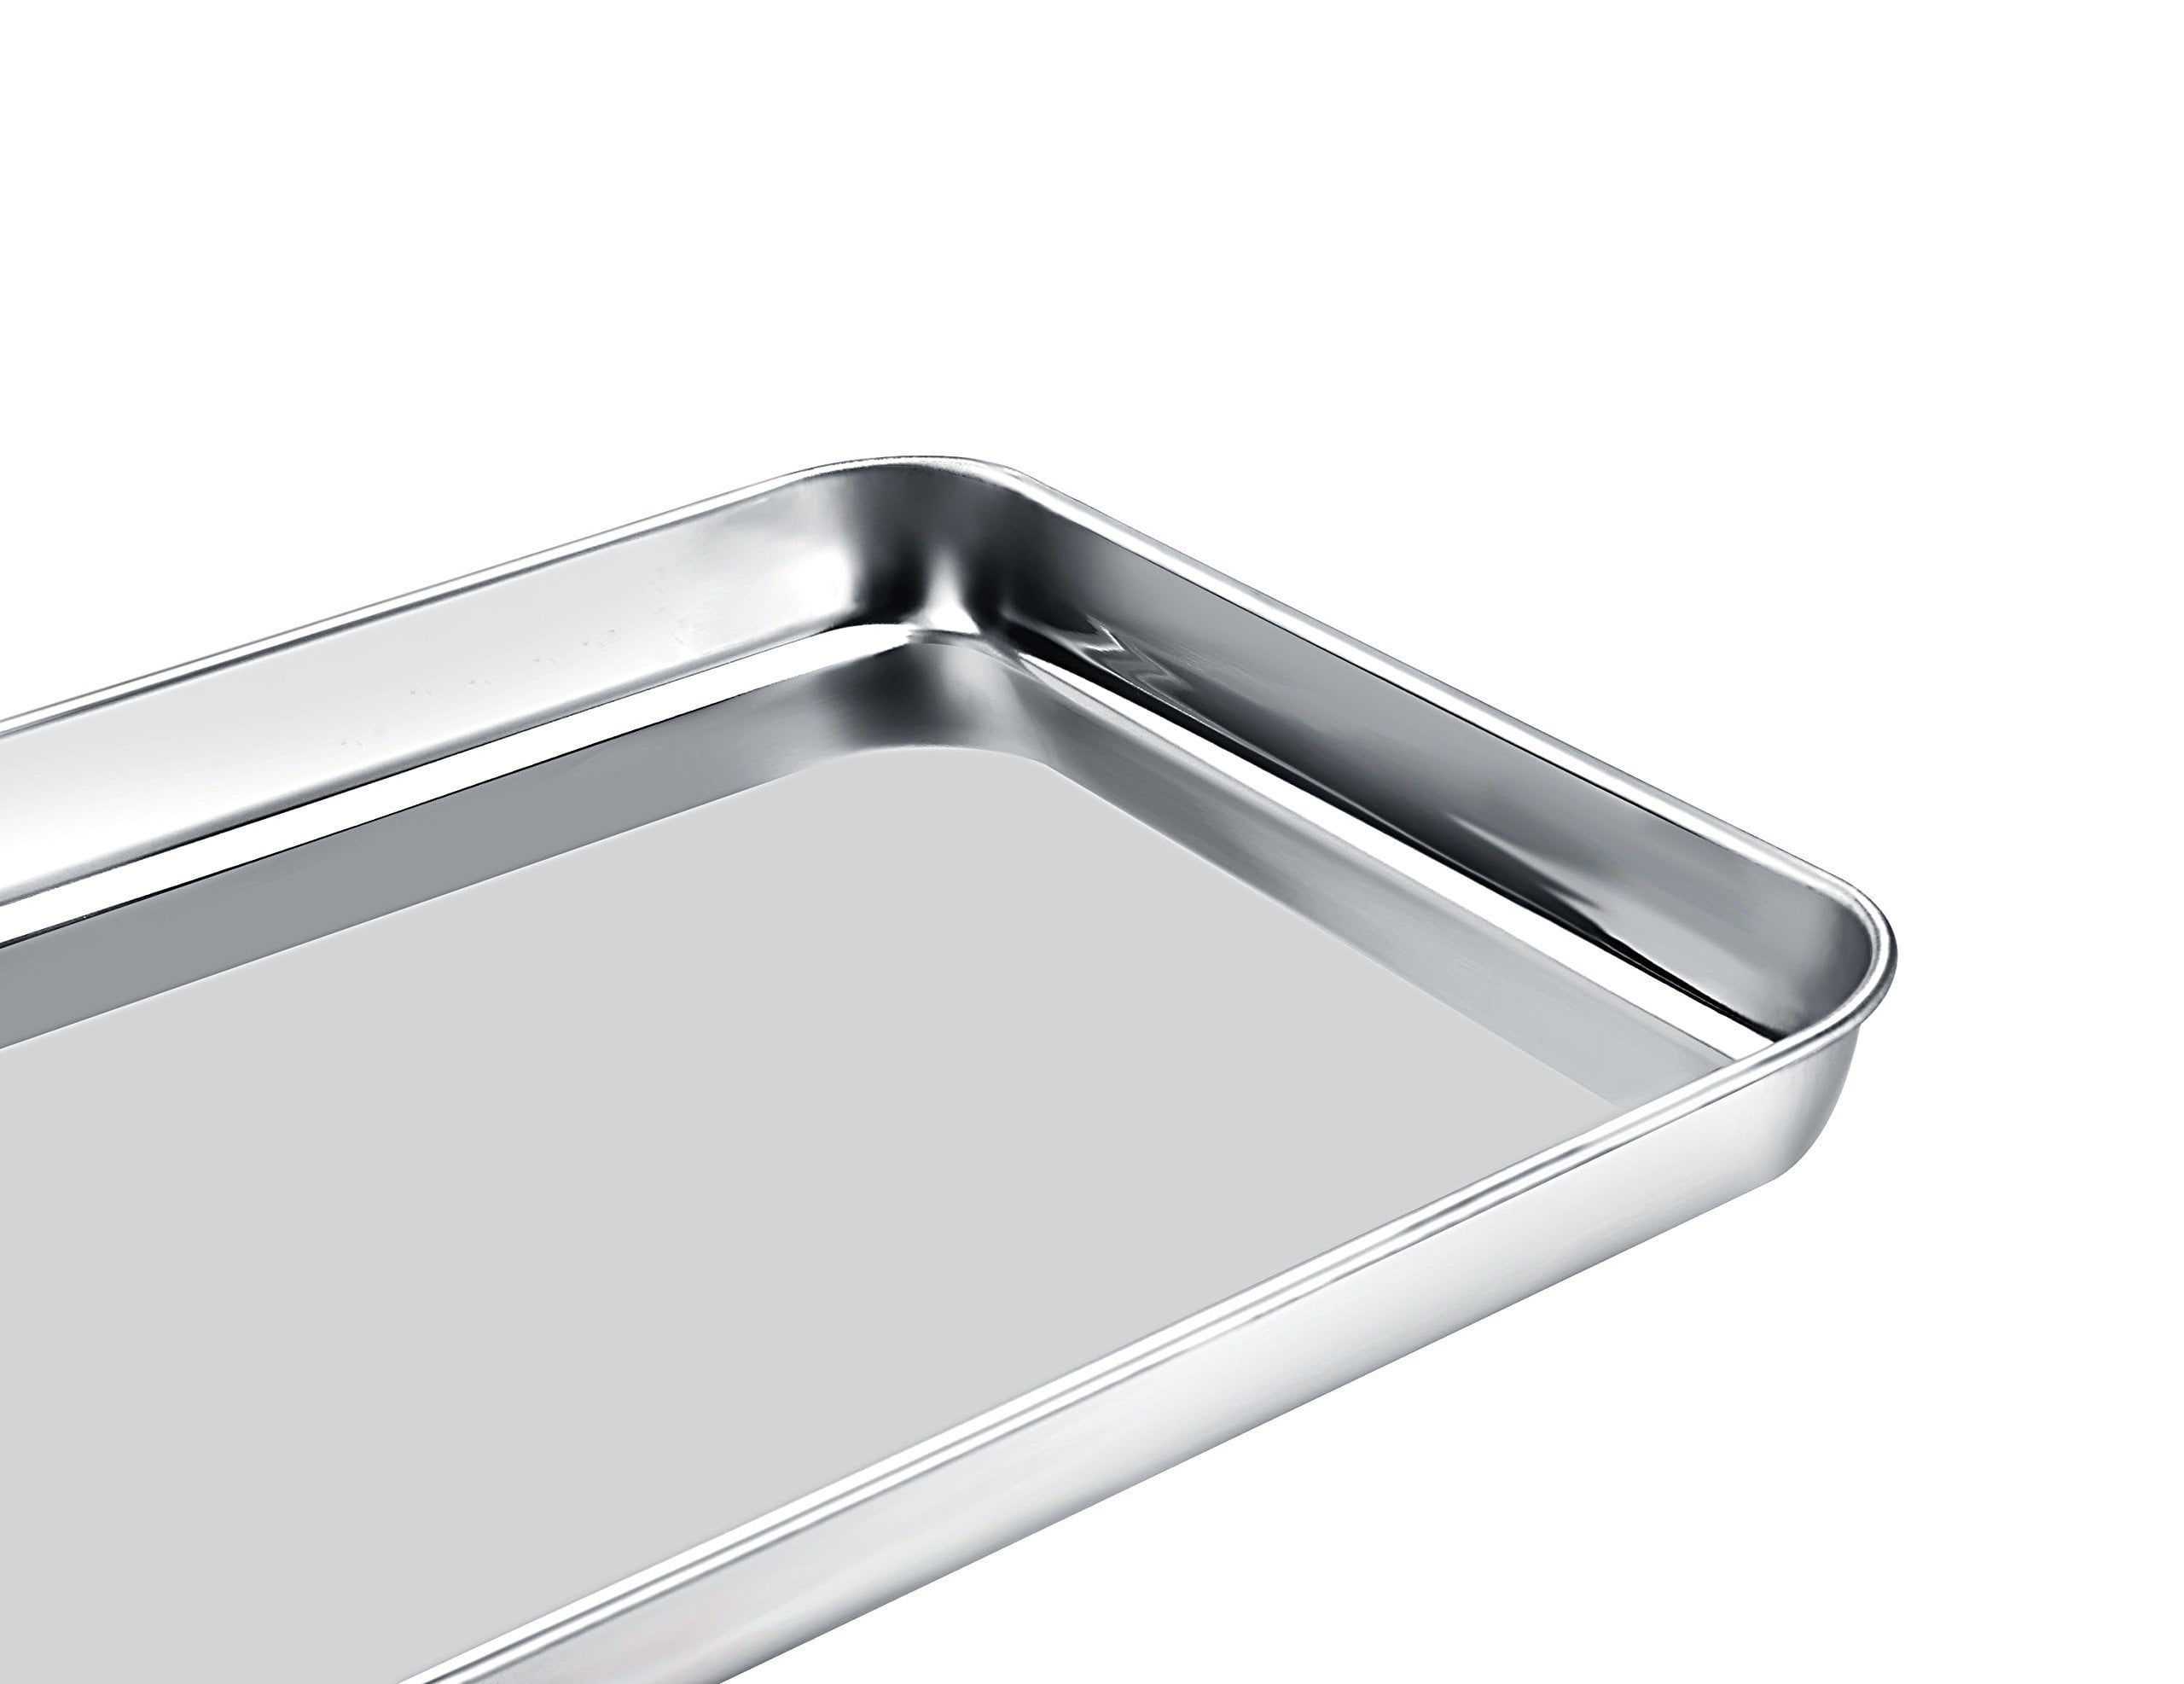 12 Pieces Baking Sheet Pan Cookie Sheet Set for Oven Stainless Steel Small  Baking Pan 10 x 8 x 1 Inch Cake Toaster Roasting Metal Rectangle Trays